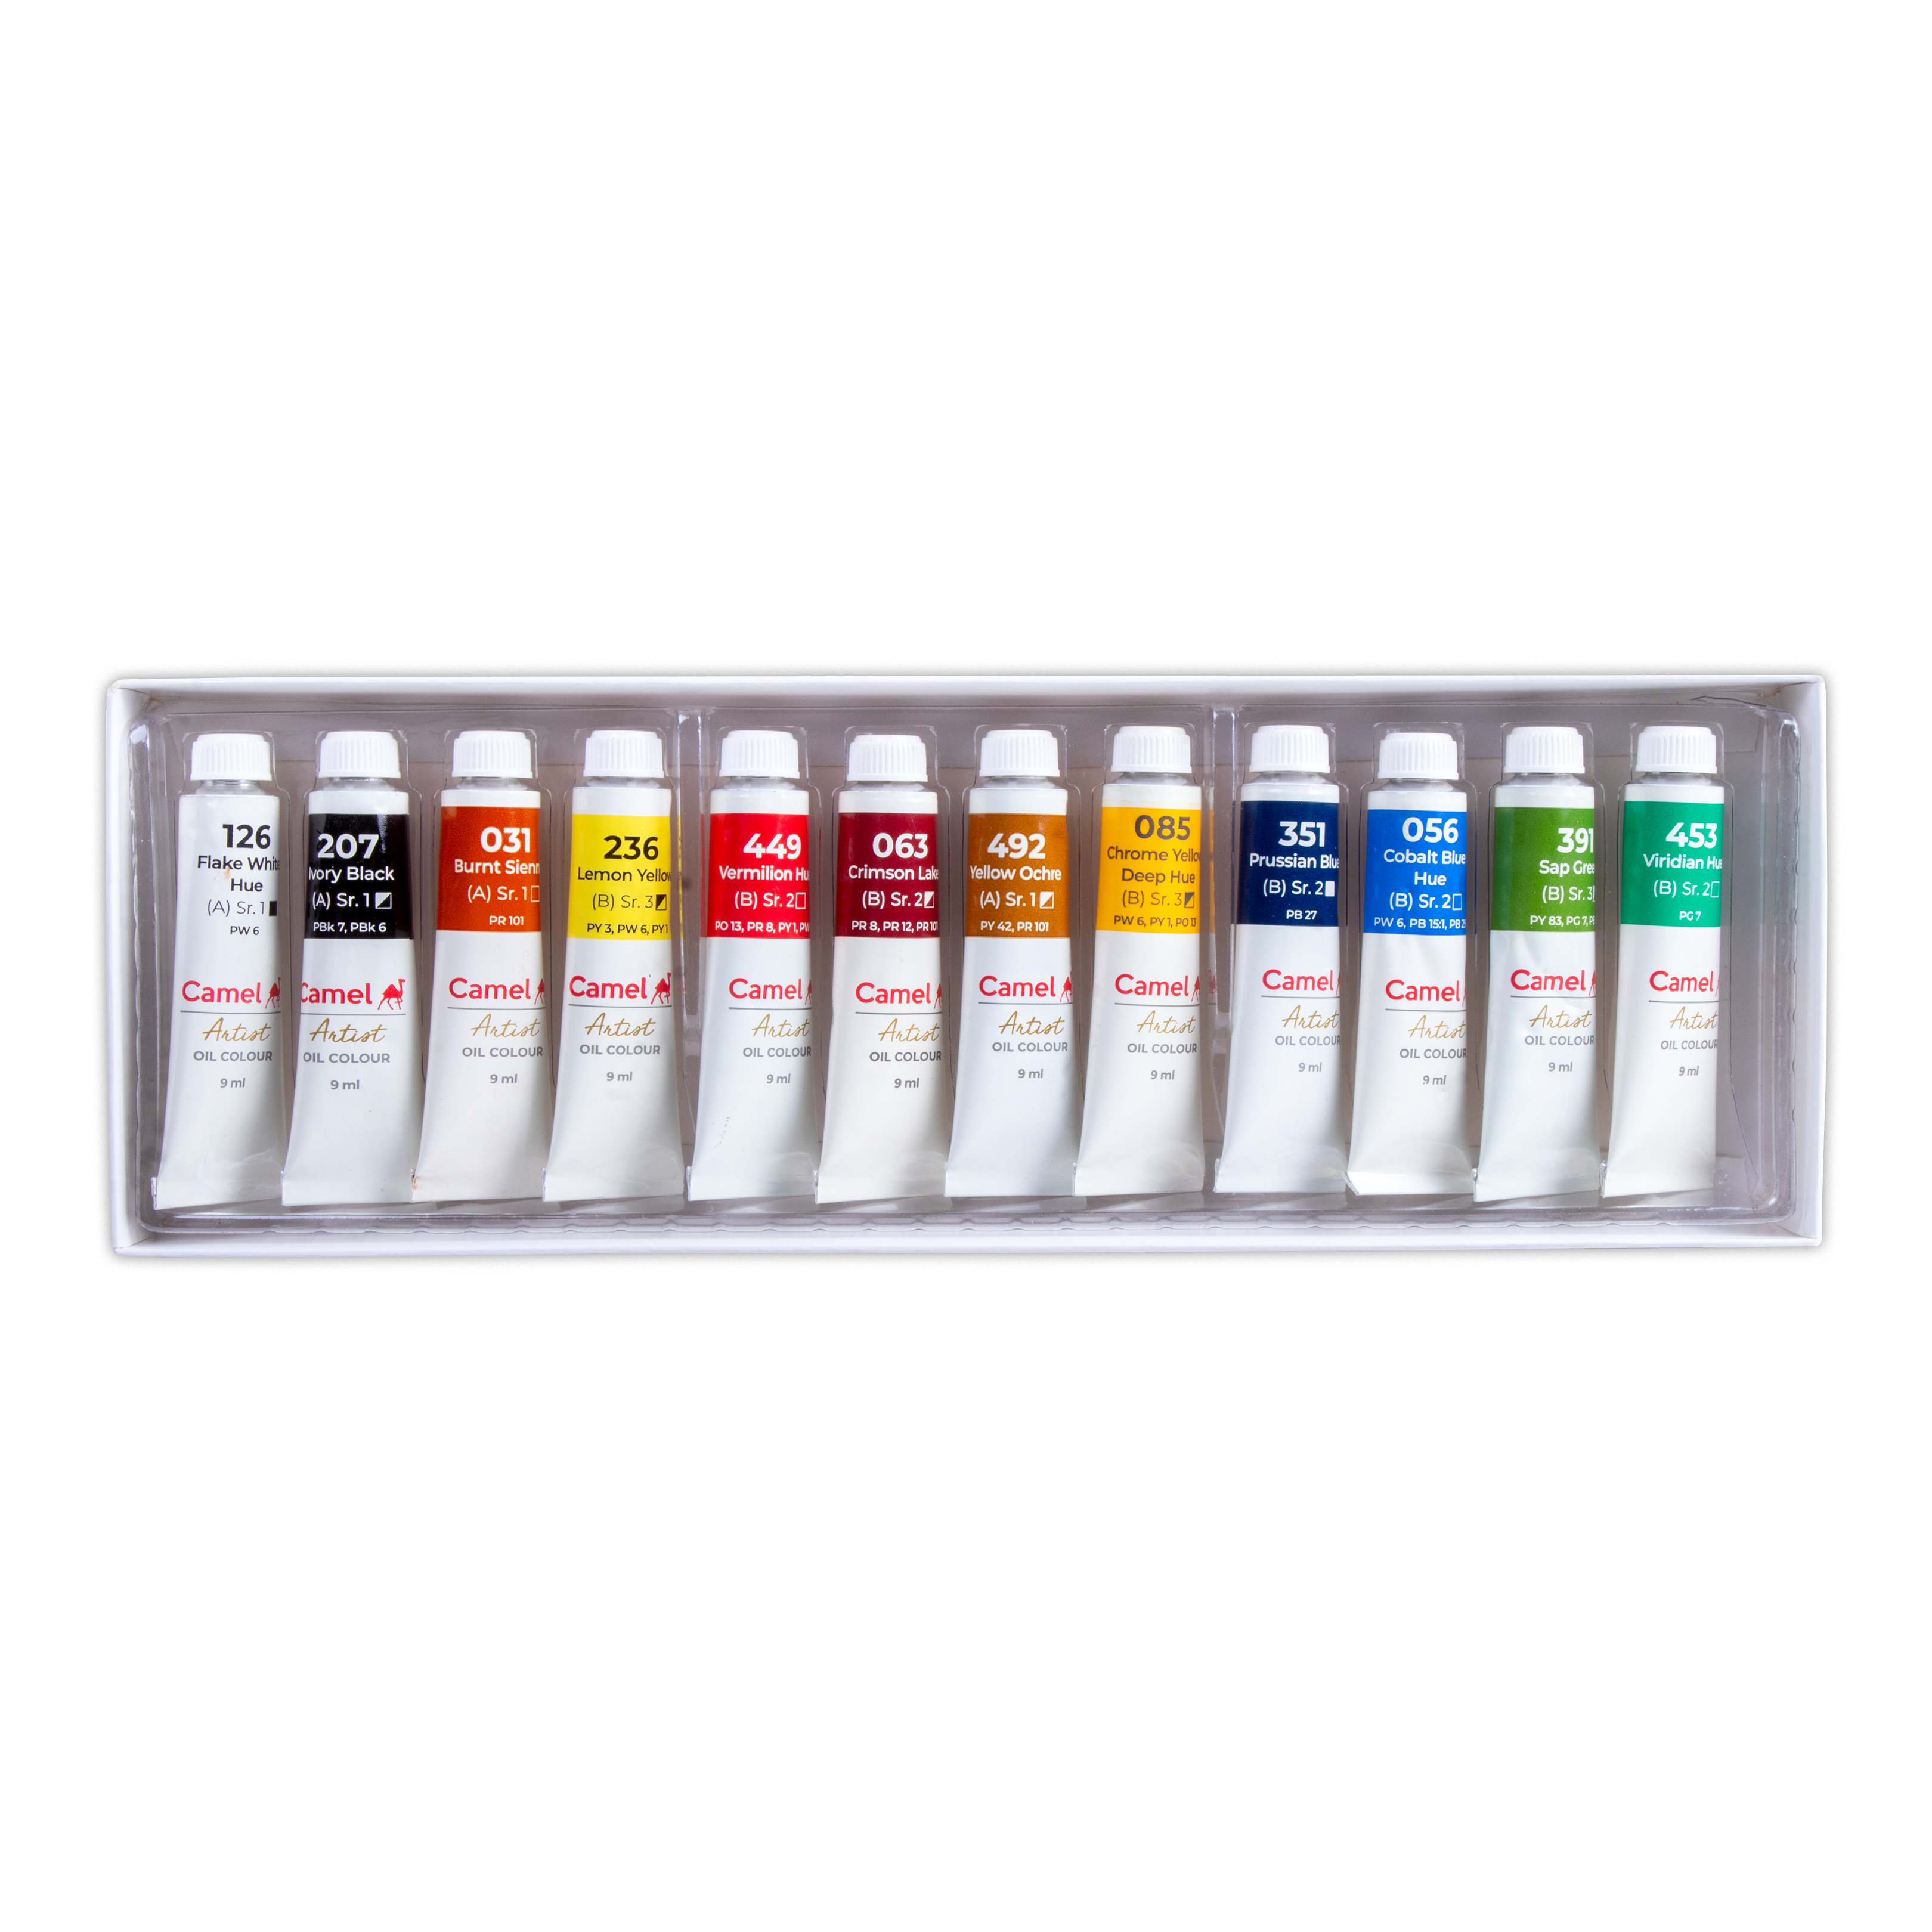 Camel Artist Oil Colours 12 Shades 9ml long lasting Colours, High Quality Pigments